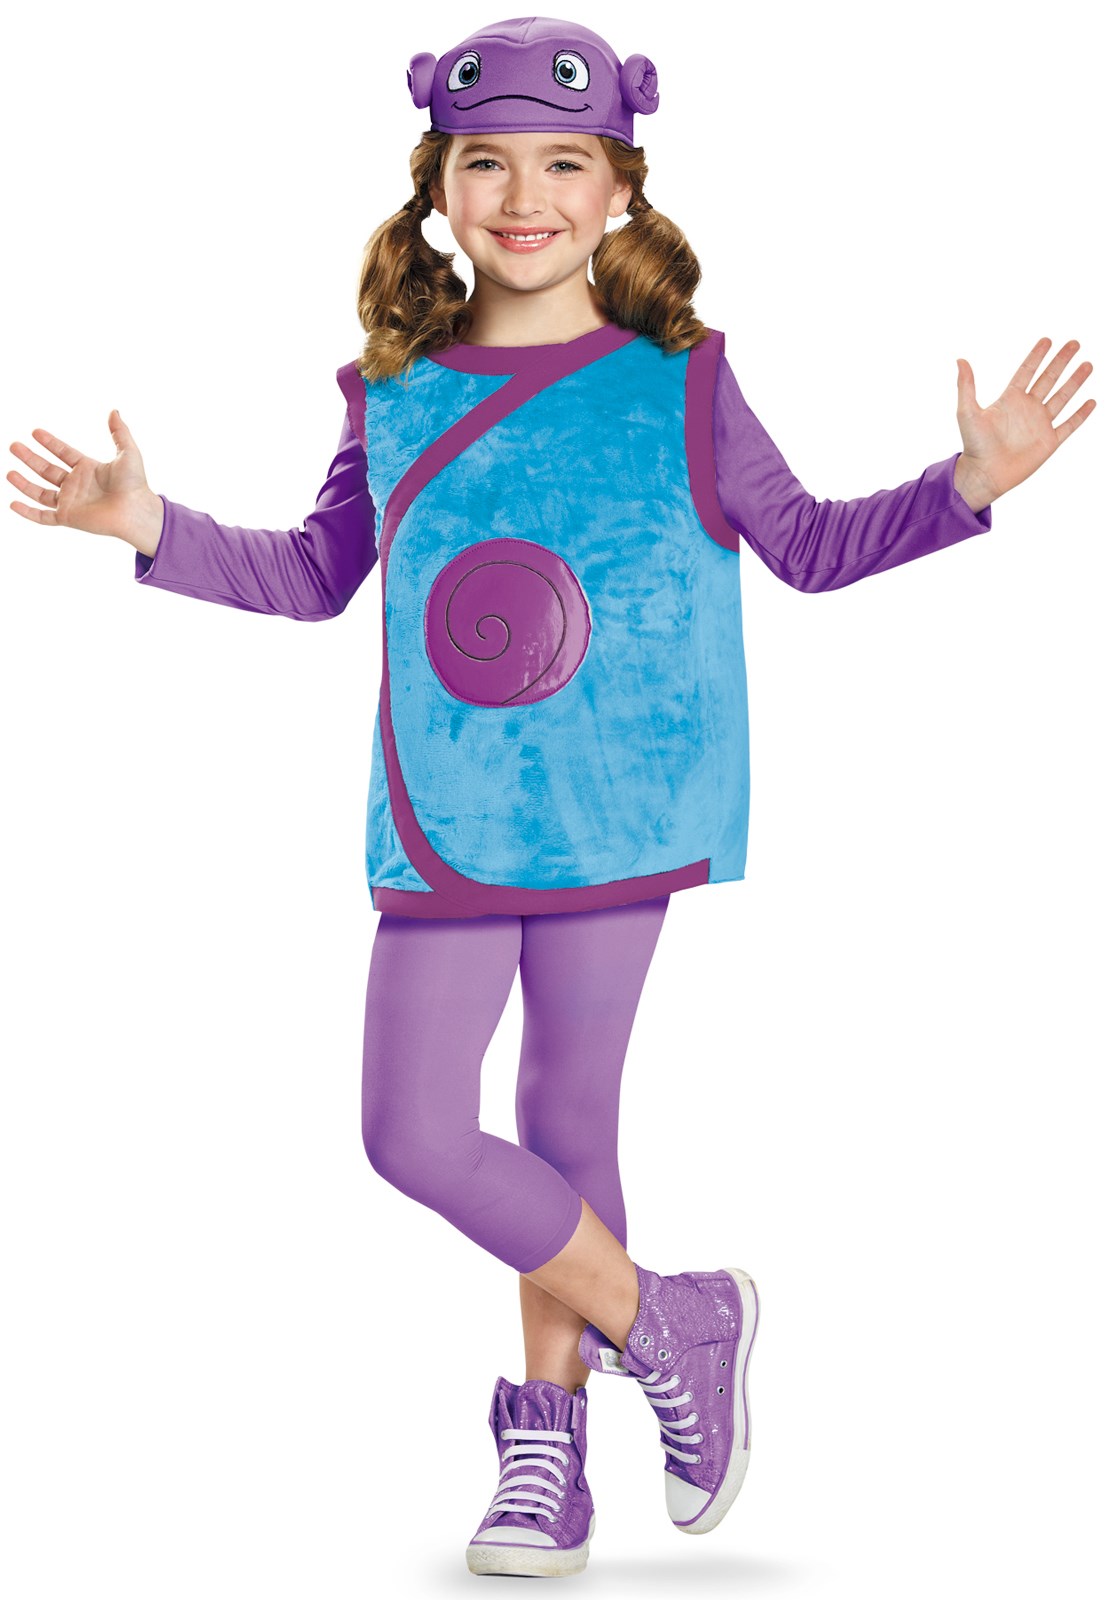 Dreamworks Home: Oh Deluxe Costume For Kids